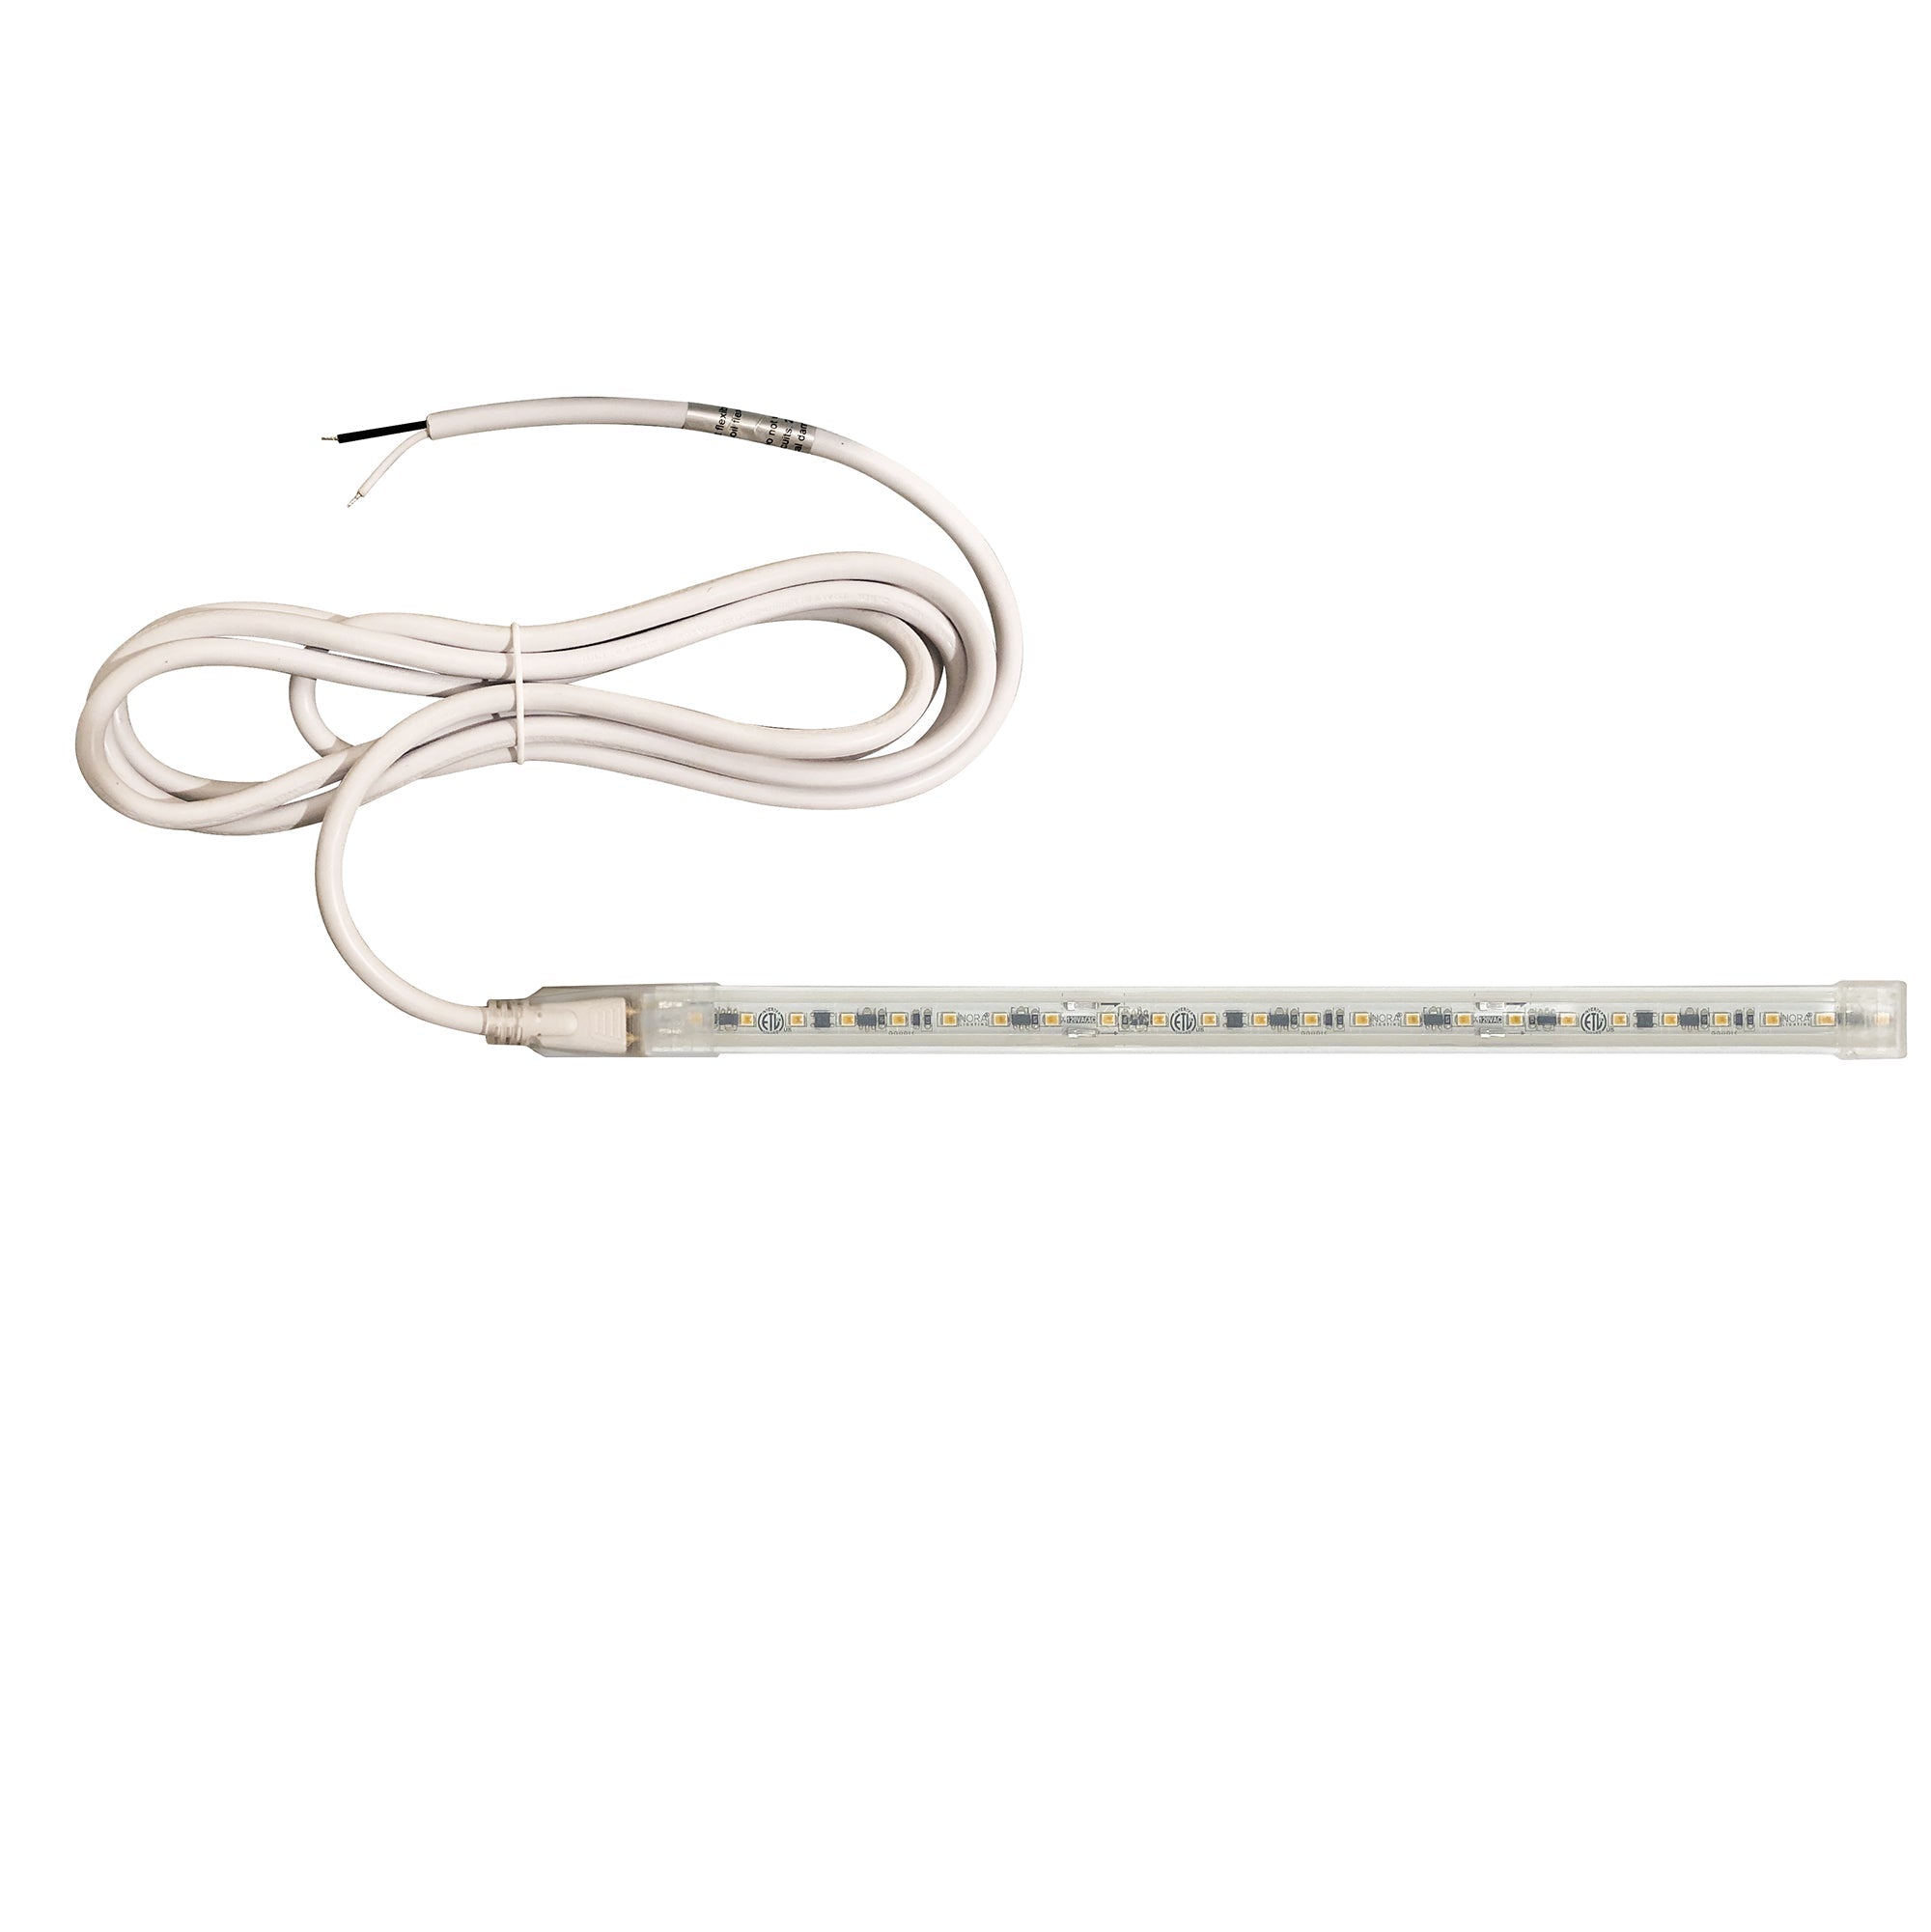 Nora Lighting NUTP13-W6-4-12-930/HW - Accent / Undercabinet - Custom Cut 6-ft, 4-in 120V Continuous LED Tape Light, 330lm / 3.6W per foot, 3000K, w/ Mounting Clips and 8' Hardwired Power Cord